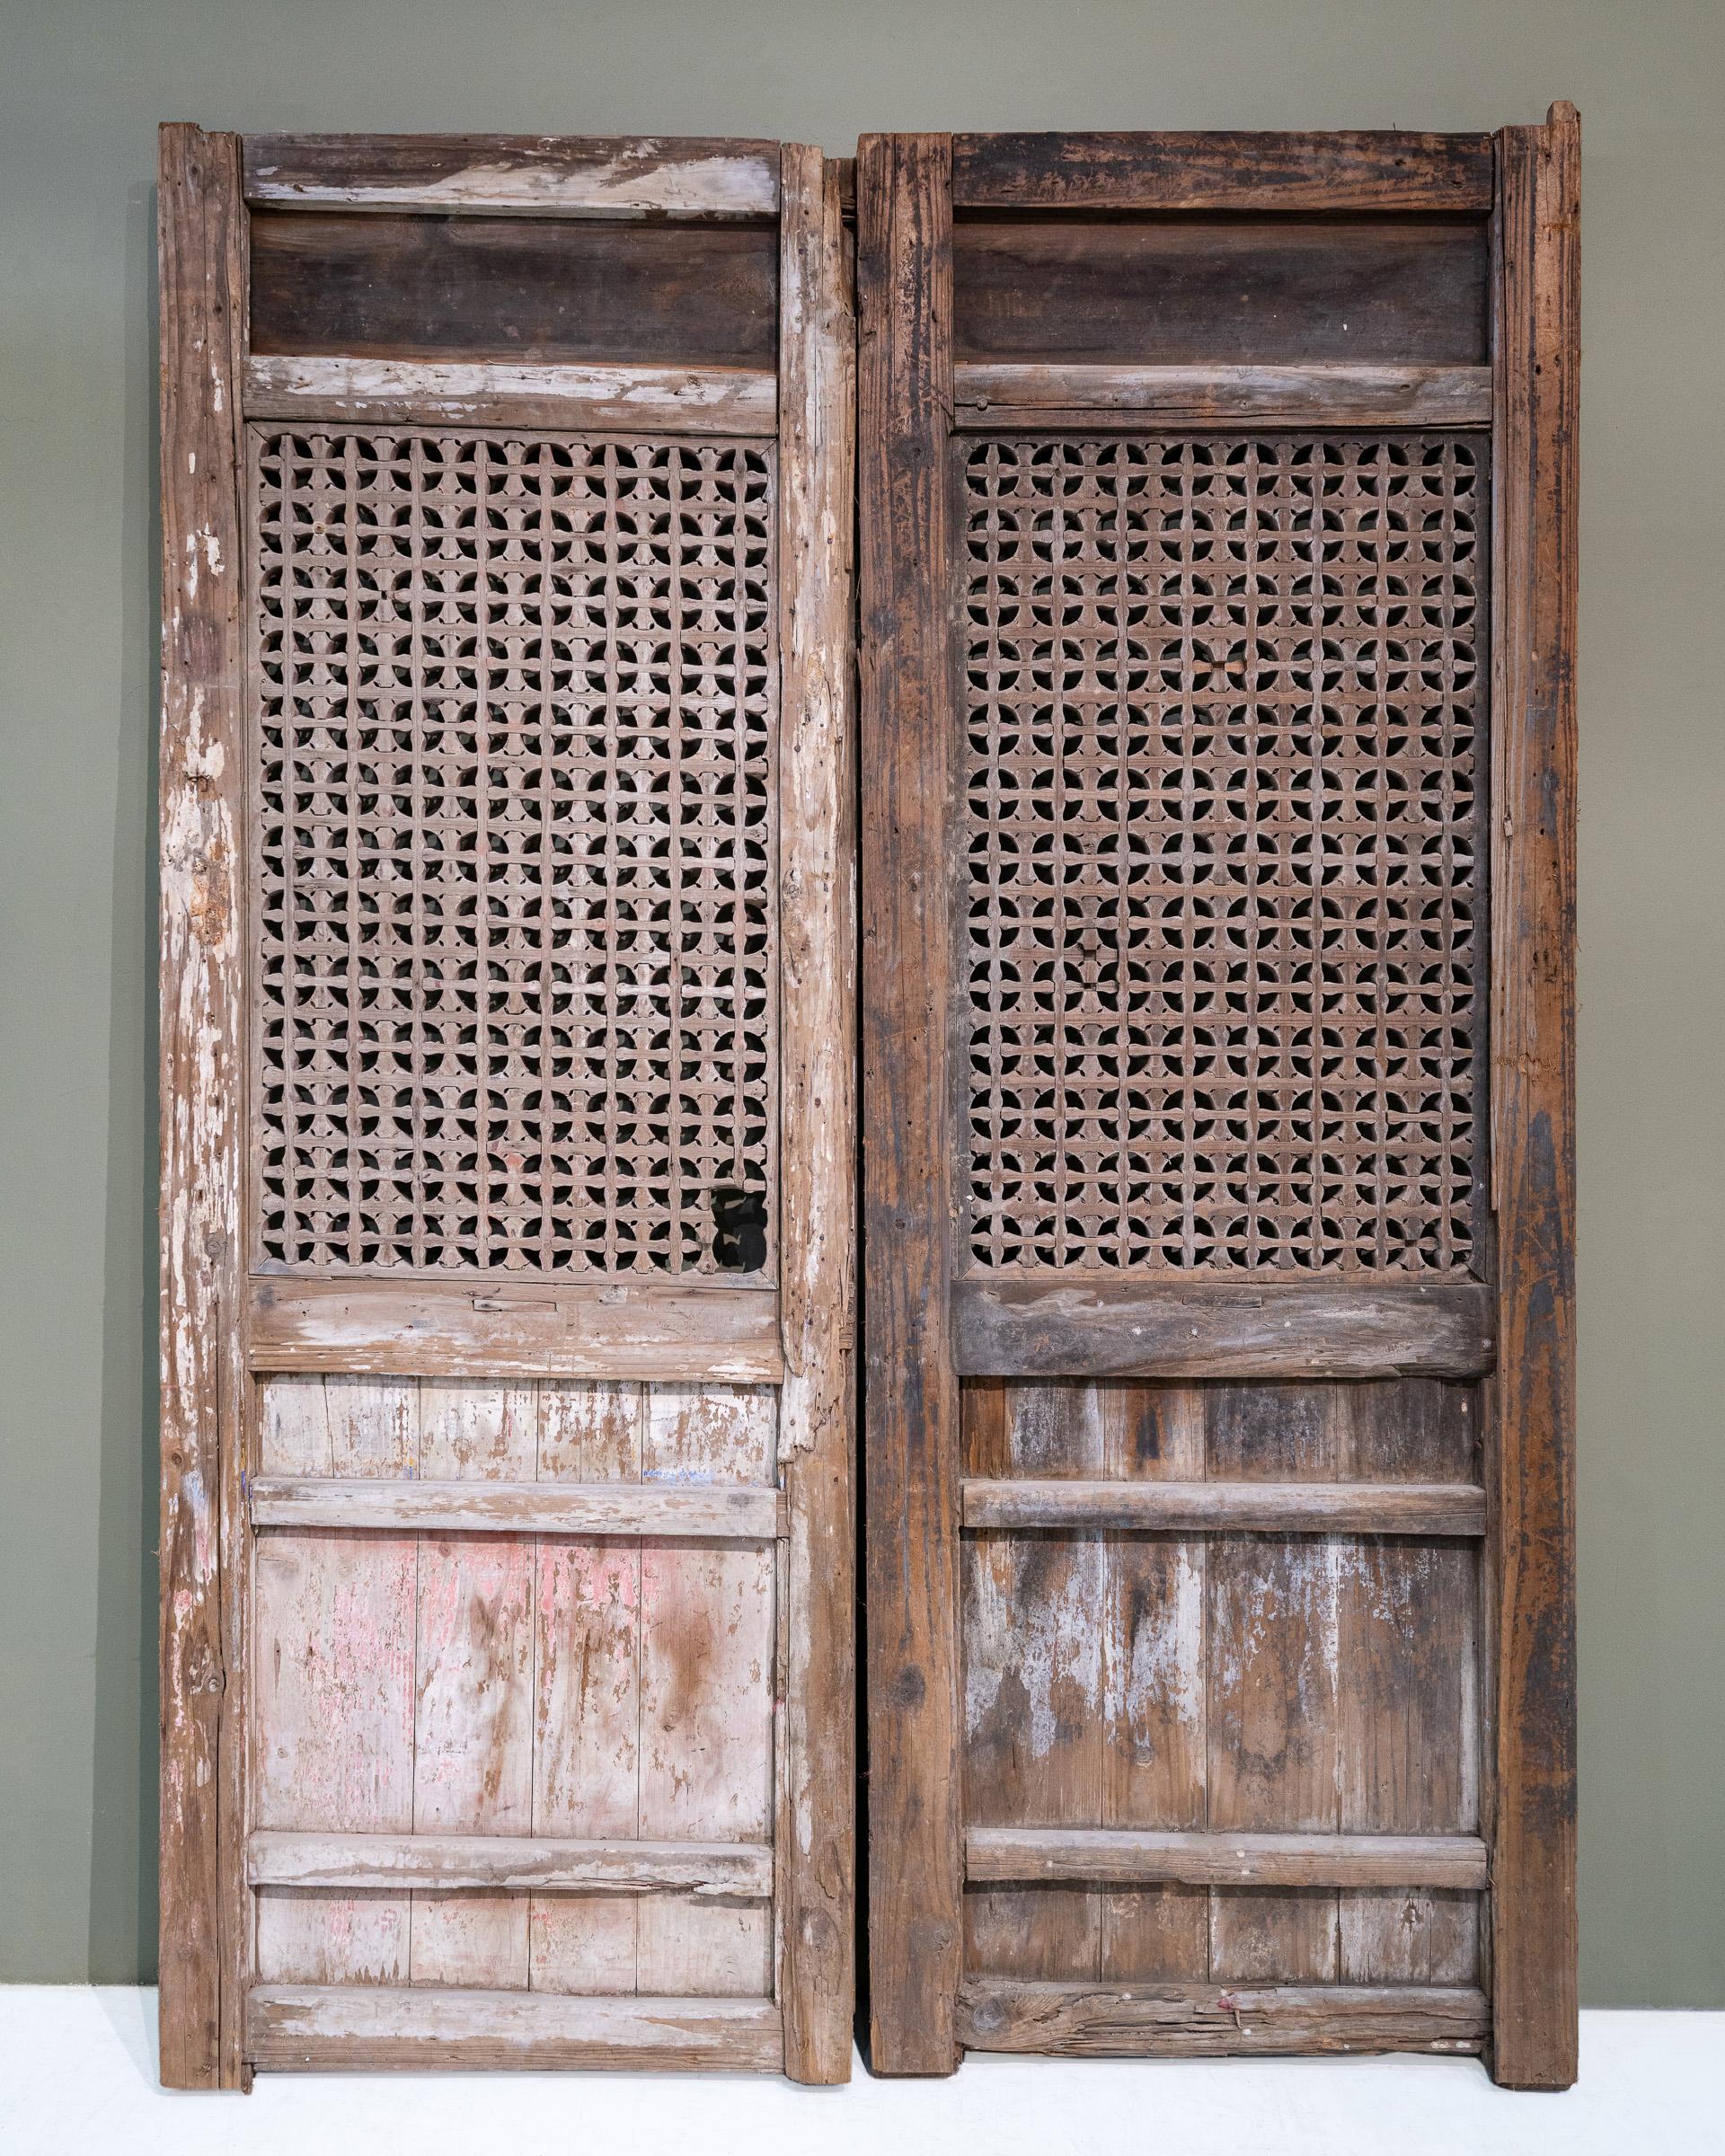 A pair of early 20th century door panels from Fujian province, China. The top panels have beautiful relief carvings of cherry blossoms, Buddha's citron and pumpkins. The floral lattice pattern in the main section is quite unusual for doors from this